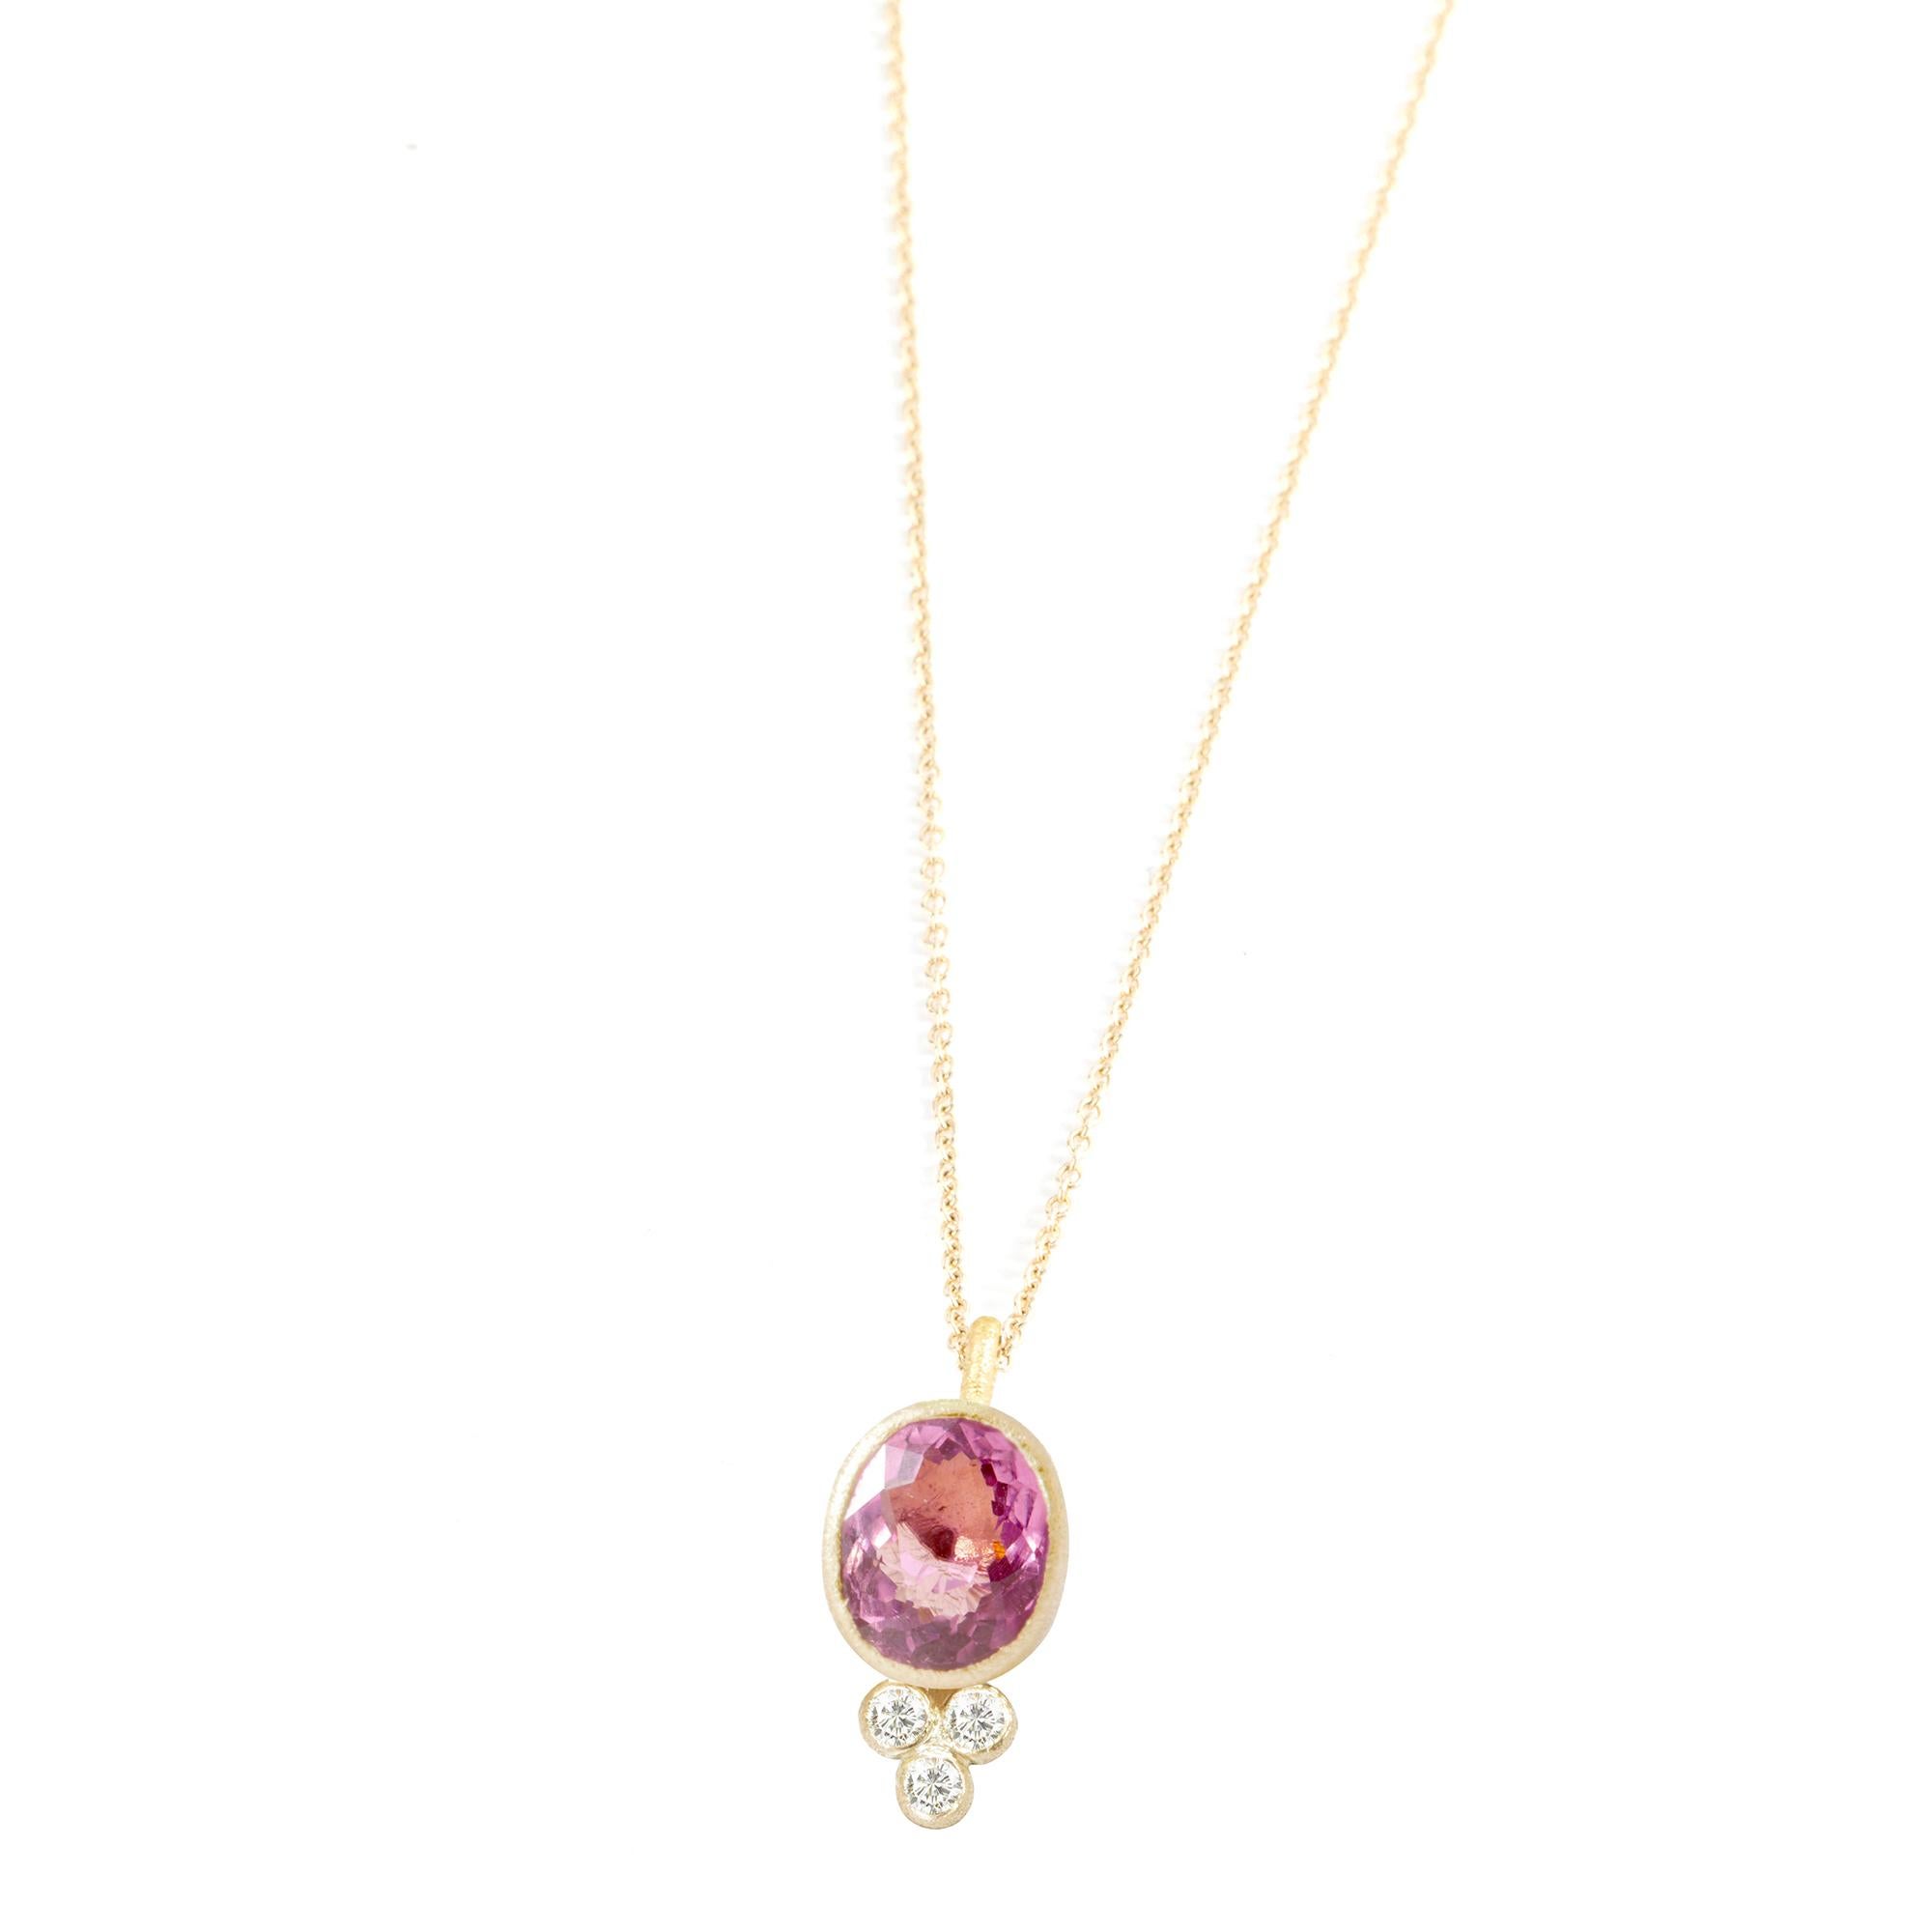 With its single, bezel-set faceted pink tourmaline, the diamond-accented Lilly Gold Necklace is clean and elegant, and a very feminine style you can wear day in, day out.

Metal: 18K Yellow Gold
Stone carat: 1.2
Diamond carat: 0.0225
Length: